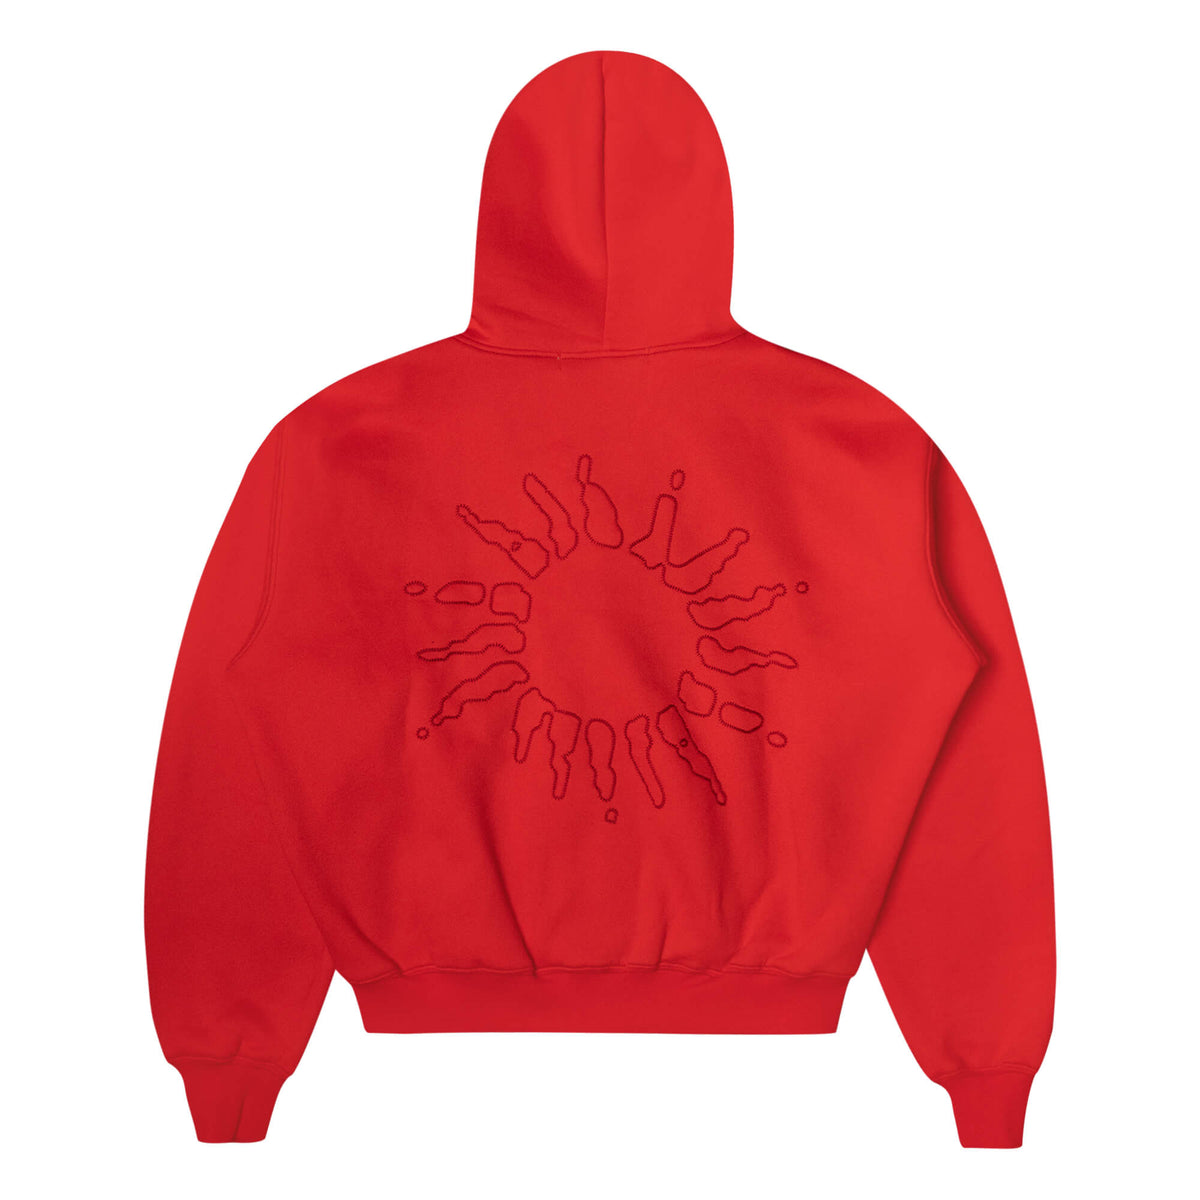 Rear view of the 4YE Signature Logo Zip Hoodie in Red. The hoodie features 325 GSM brushed medium weight fleece offering ultimate comfort and warmth, including high-quality chain stitch embroidery and a 2-way YKK zipper, showcasing a trendy cropped and boxy fit.